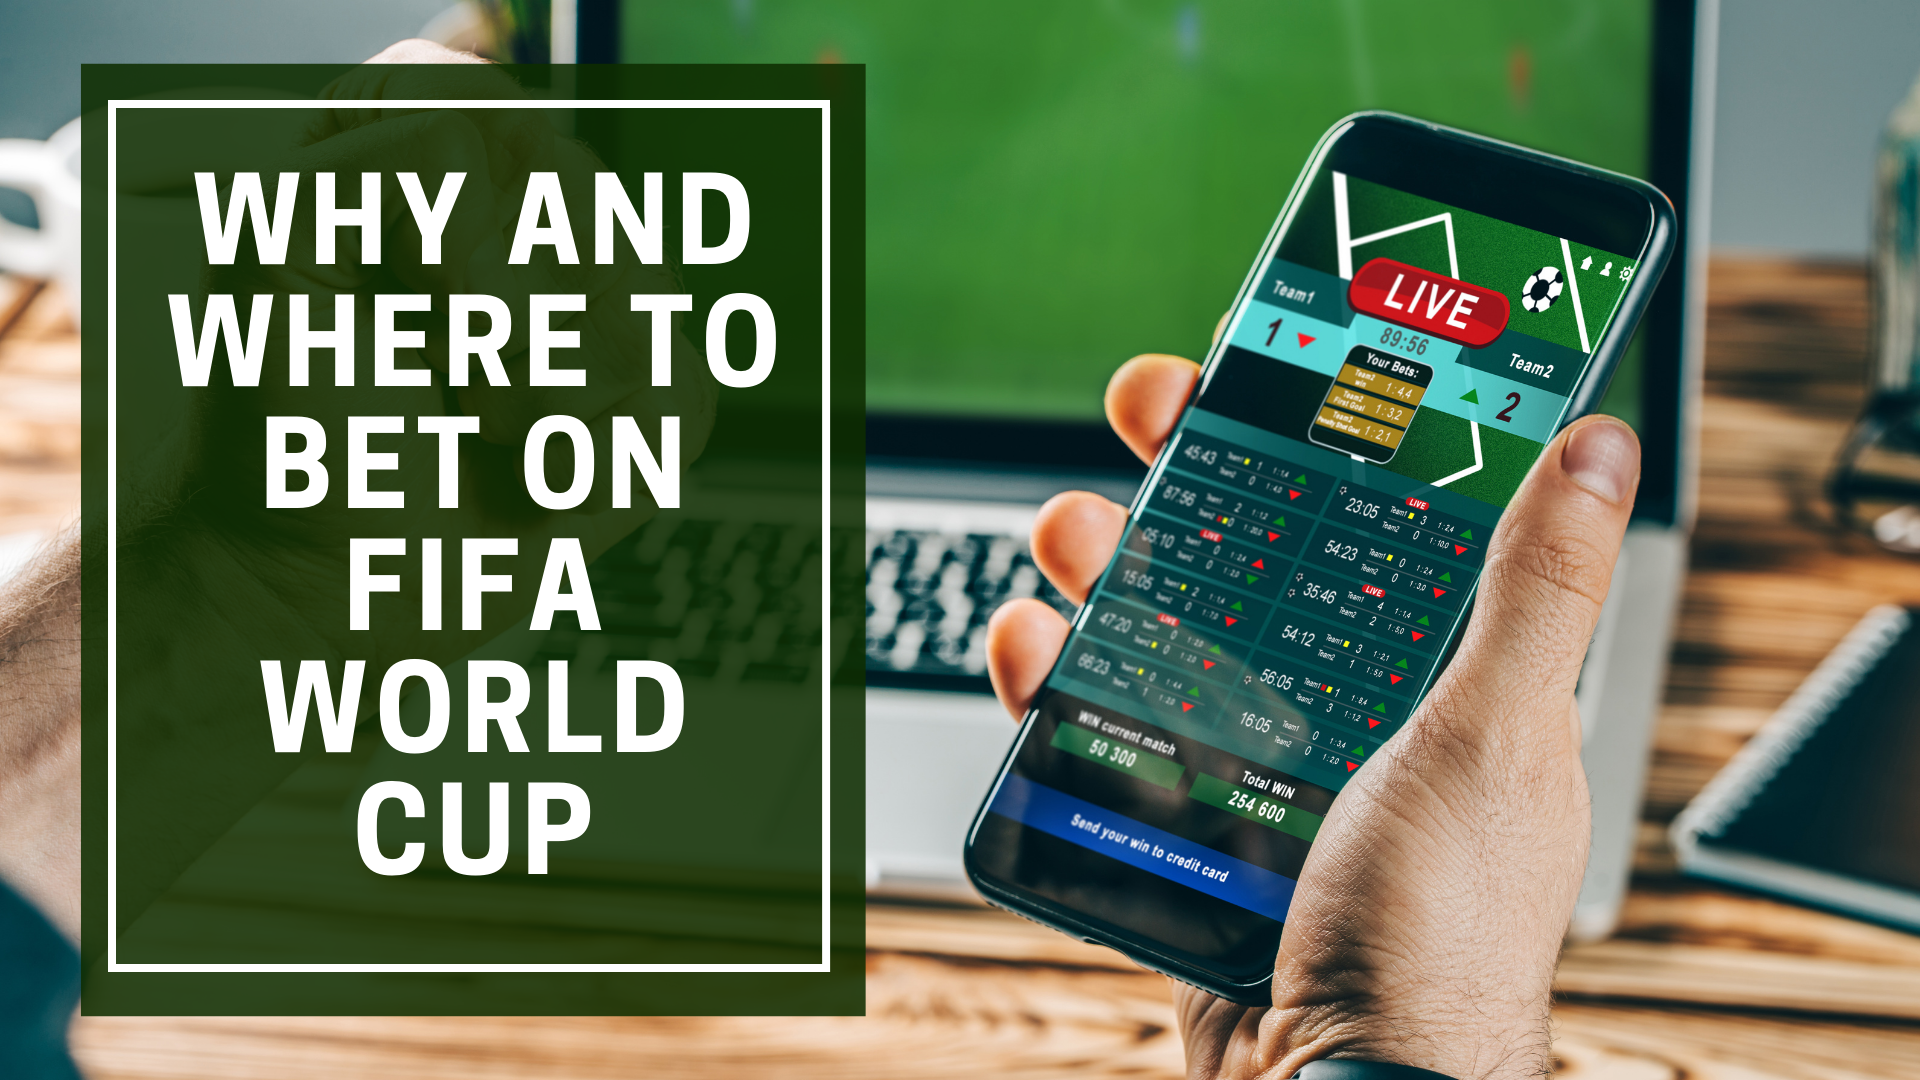 Why and where to bet on FIFA World Cup